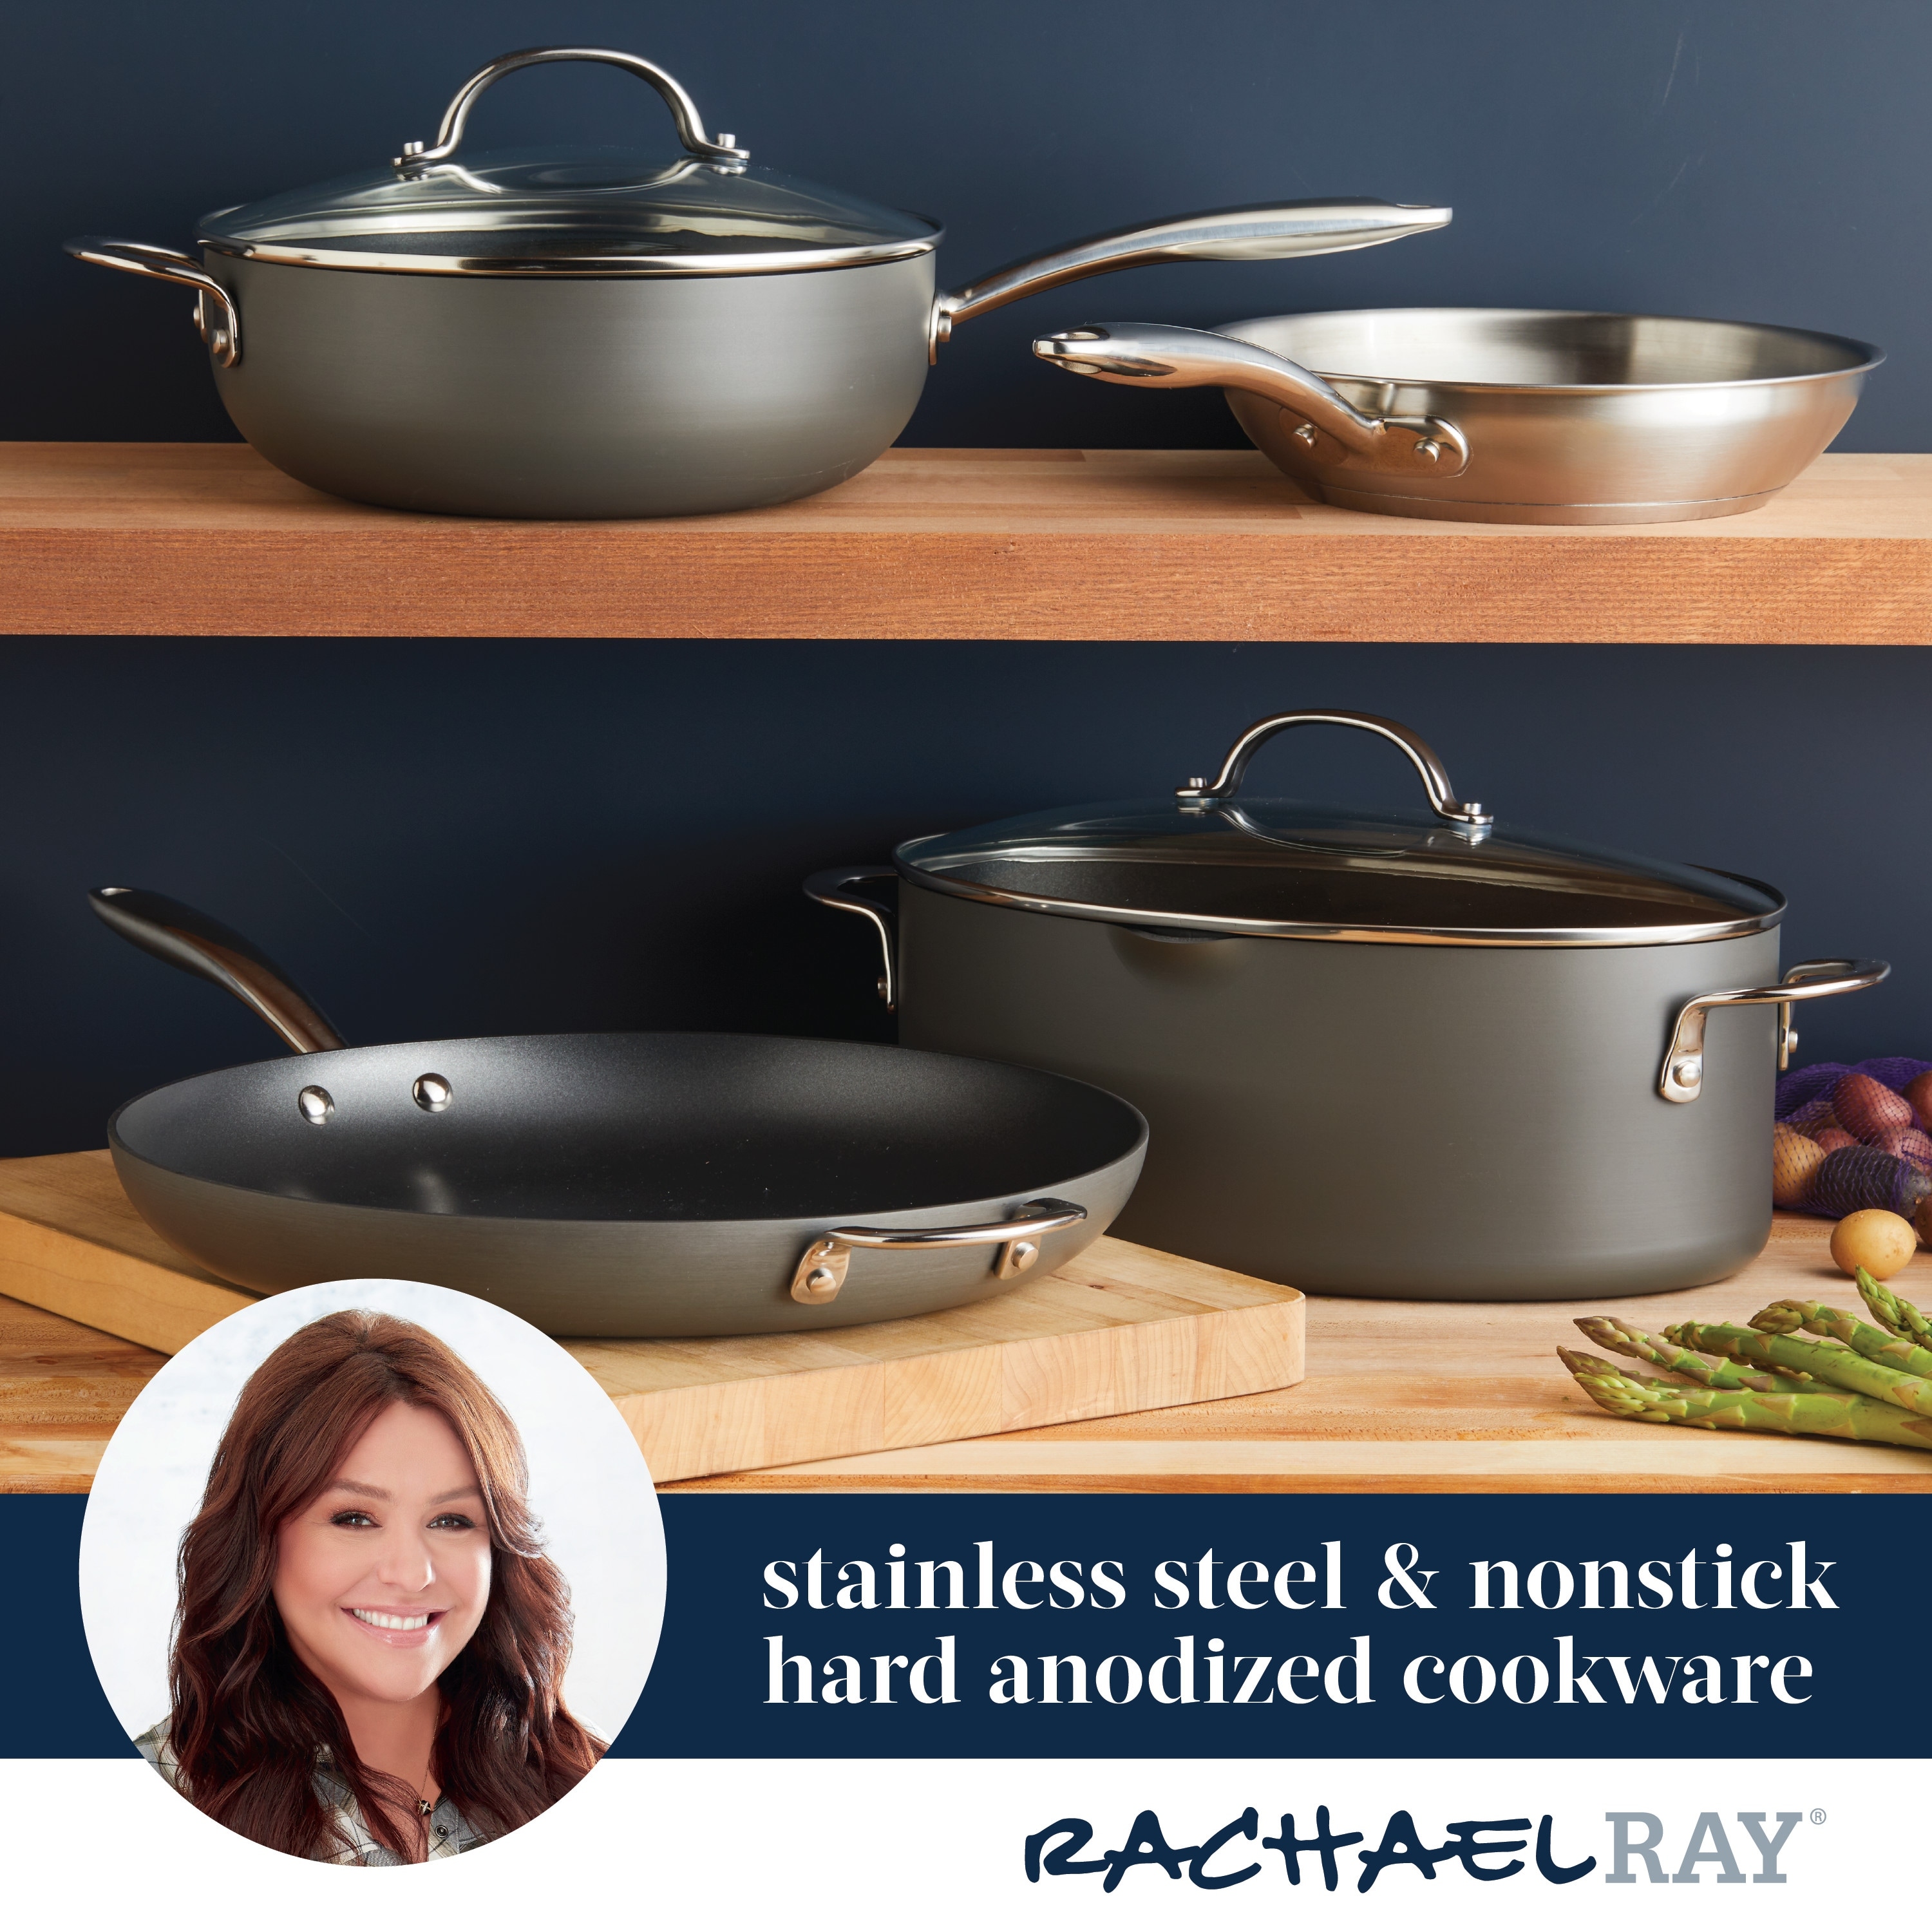 https://ak1.ostkcdn.com/images/products/is/images/direct/5ac1b06cd4c18ab056f961b15b2aeb817155d417/Rachael-Ray-Hard-Anodized-Nonstick-Cookware-Oval-Pasta-Stockpot-and-Braiser%2C-8-Quart%2C-Gray.jpg